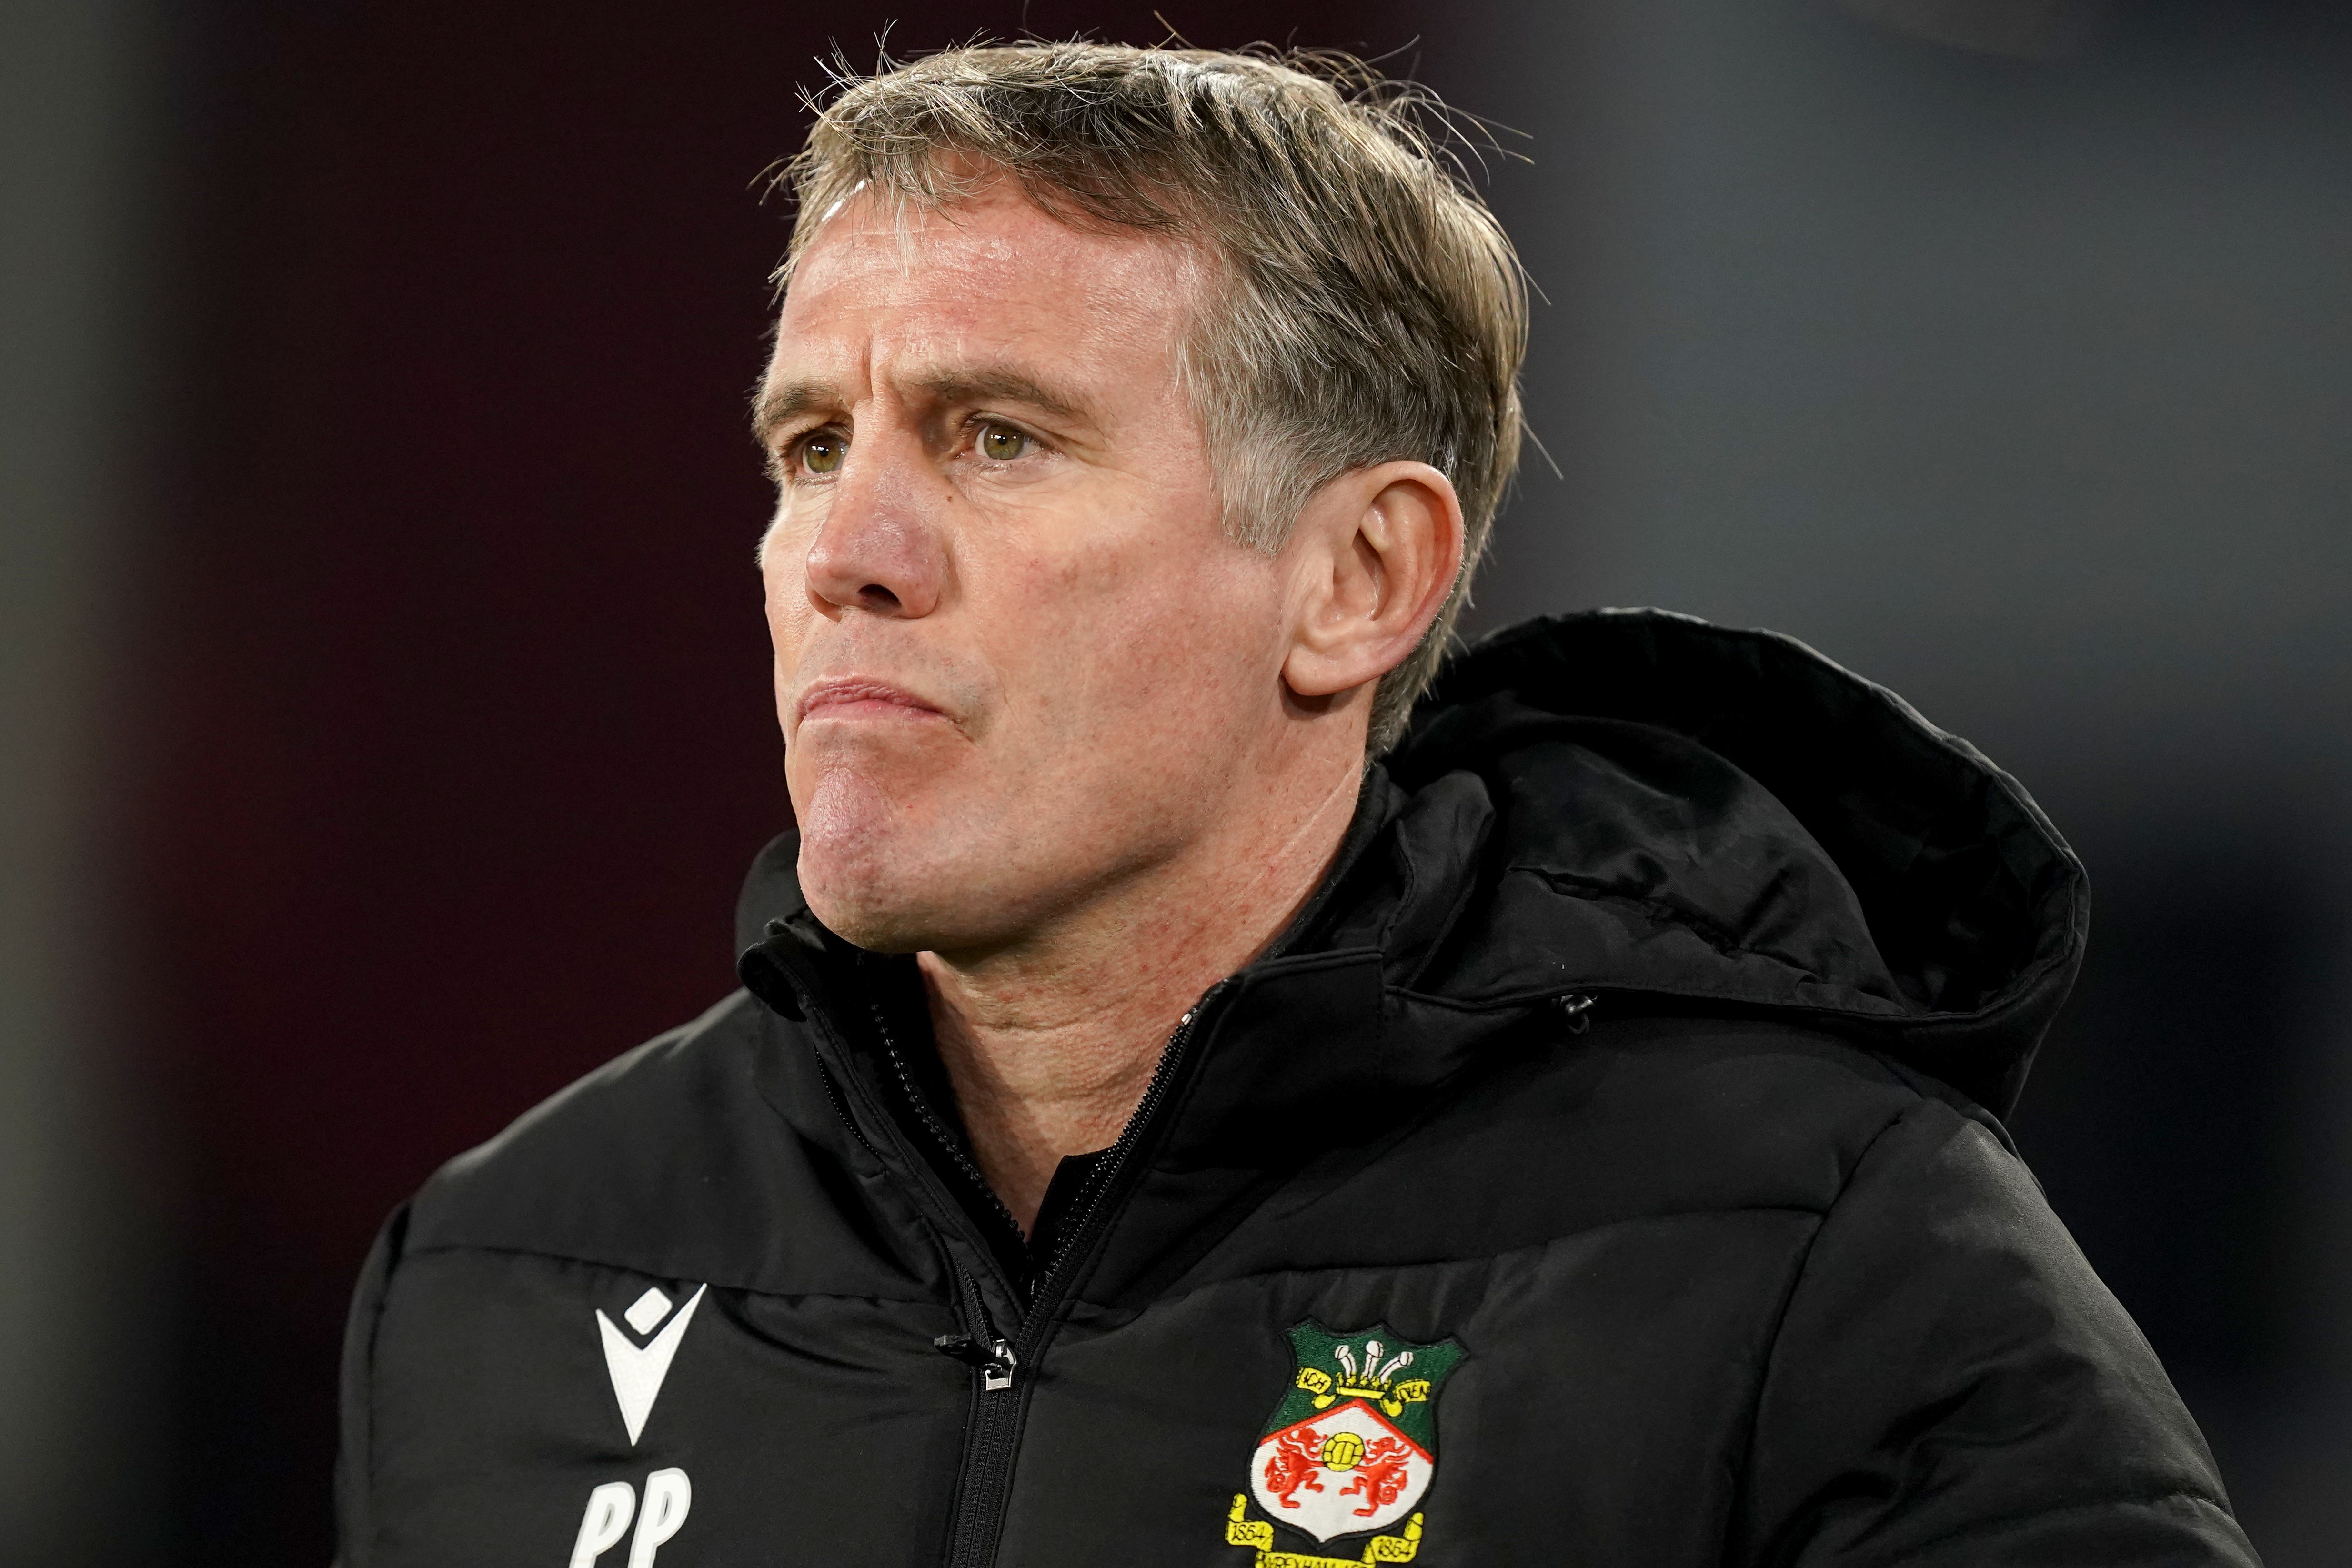 Wrexham manager Phil Parkinson will be on the touchline for Tuesday’s game against Yeovil, despite being shown a red card on Saturday (Mike Egerton/PA)